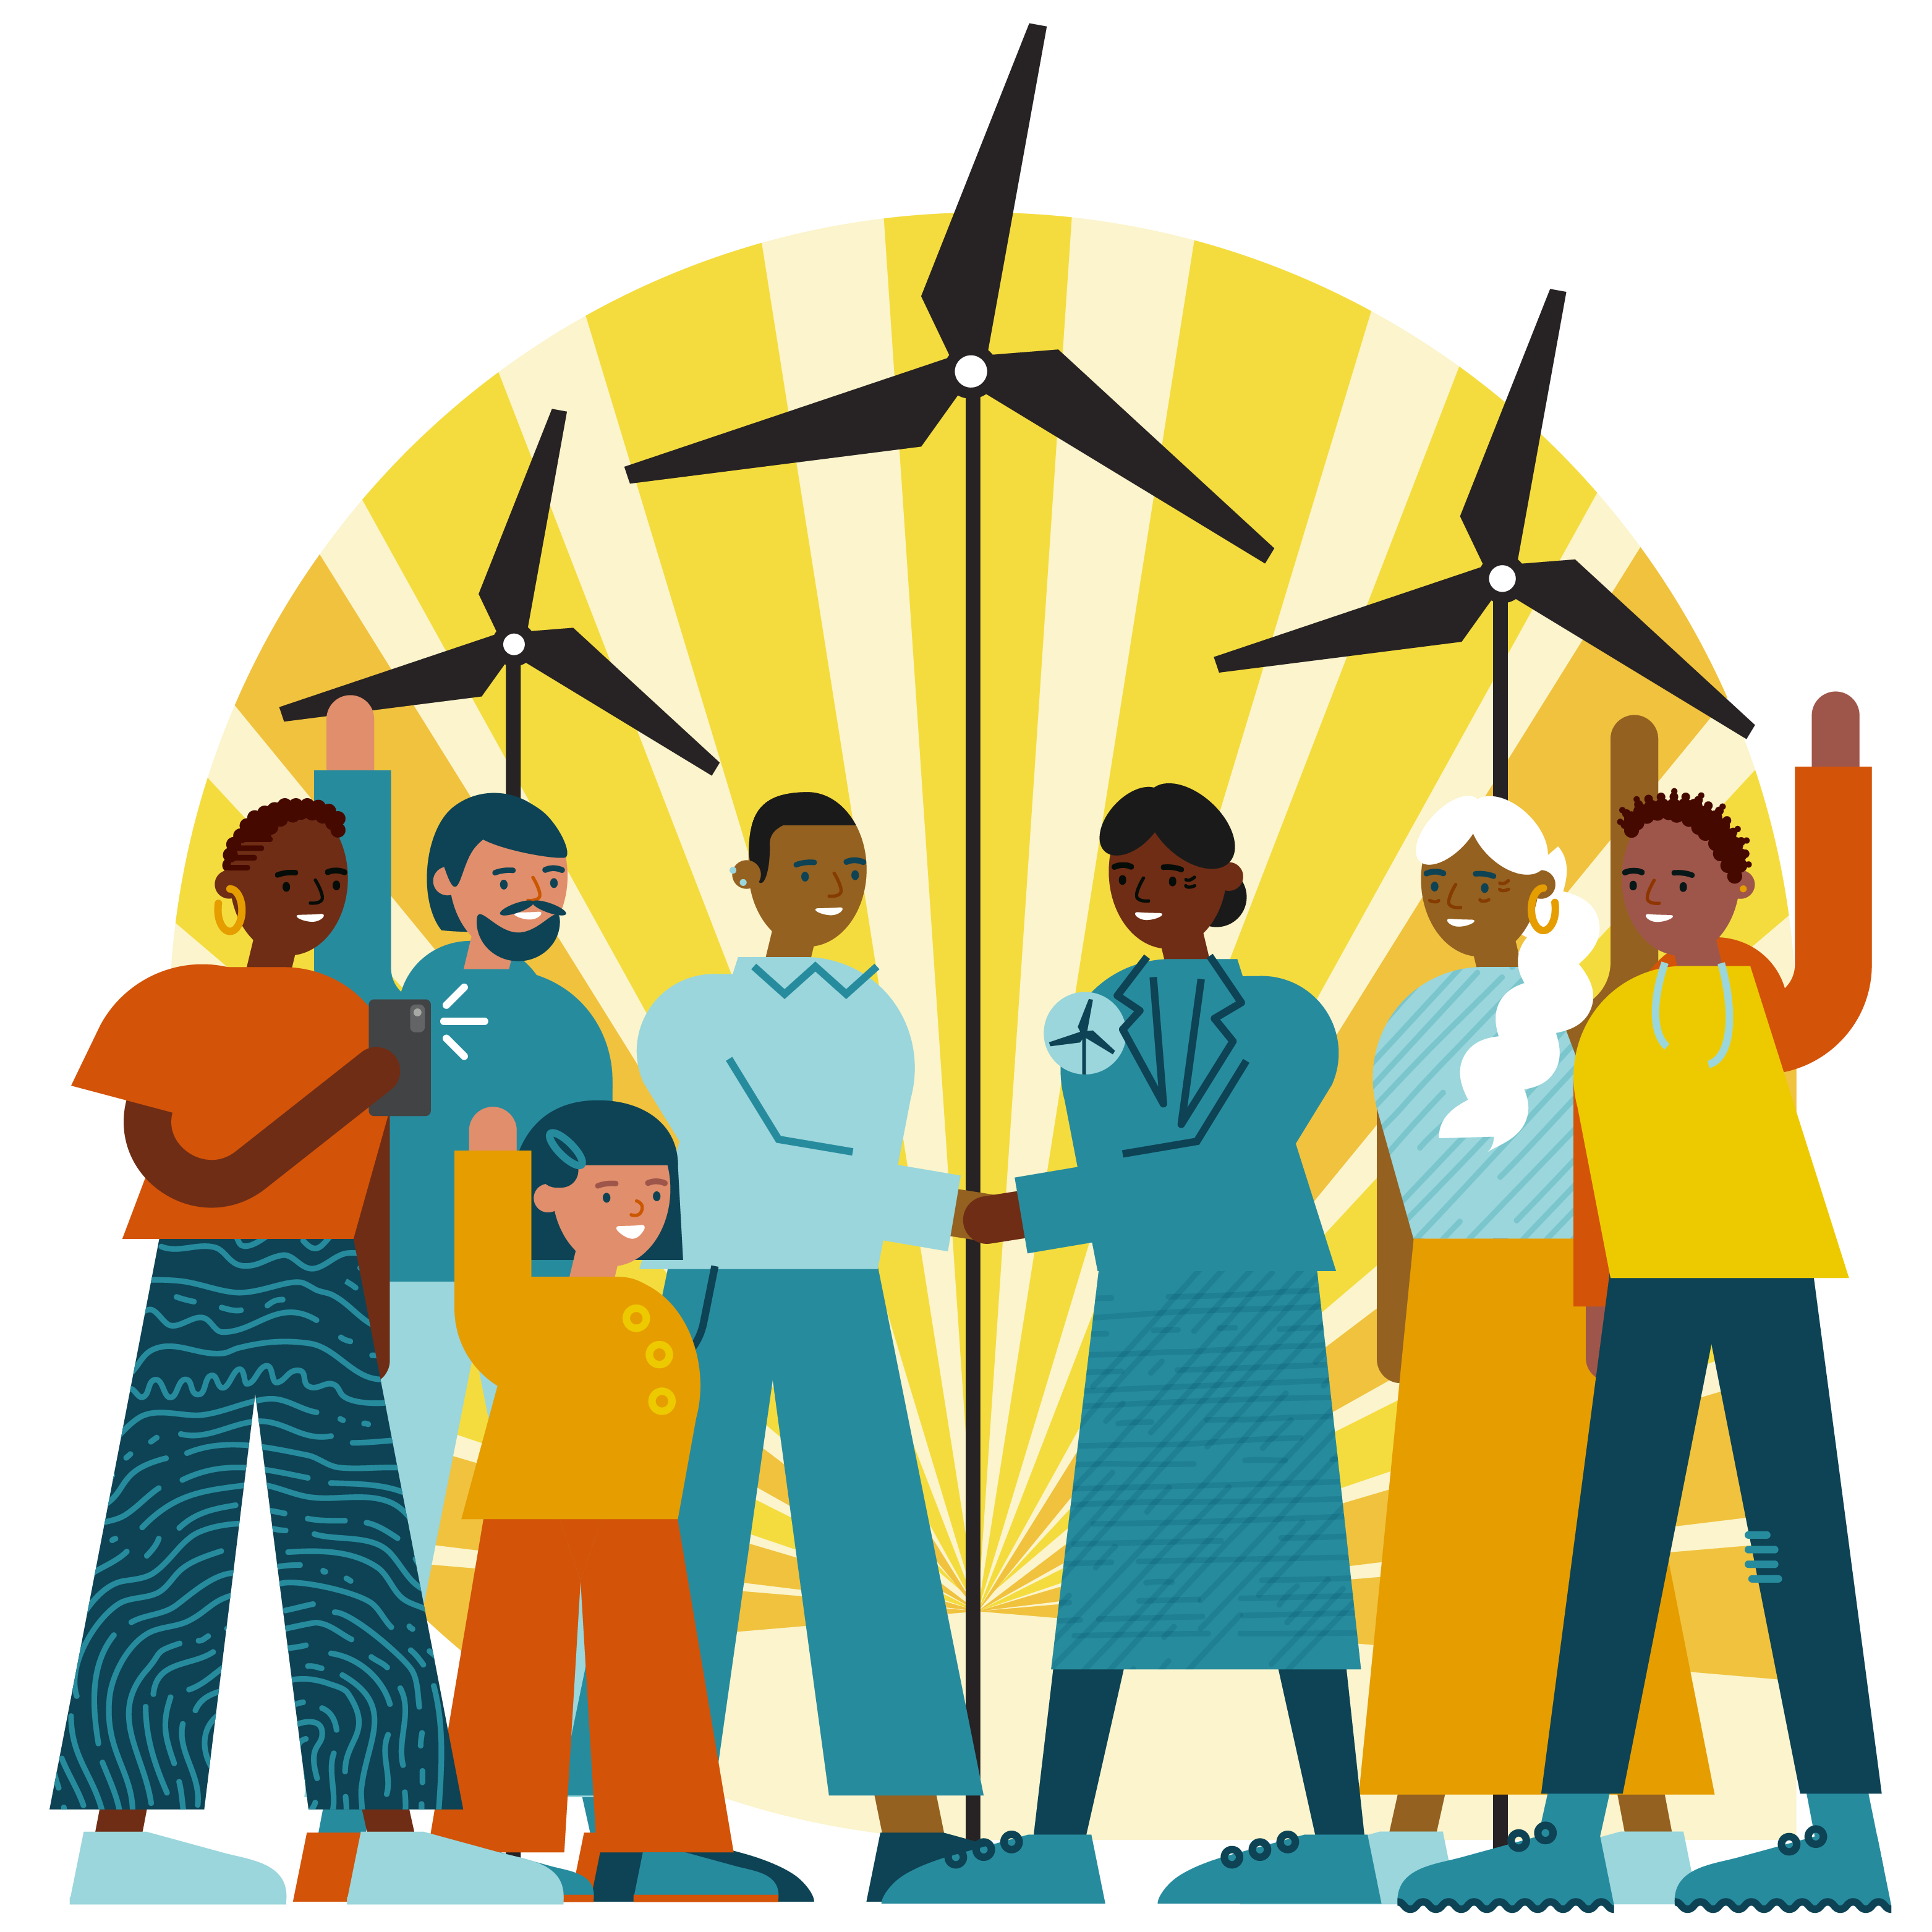 Illustrated figures cheering about clean energy in front of wind turbines